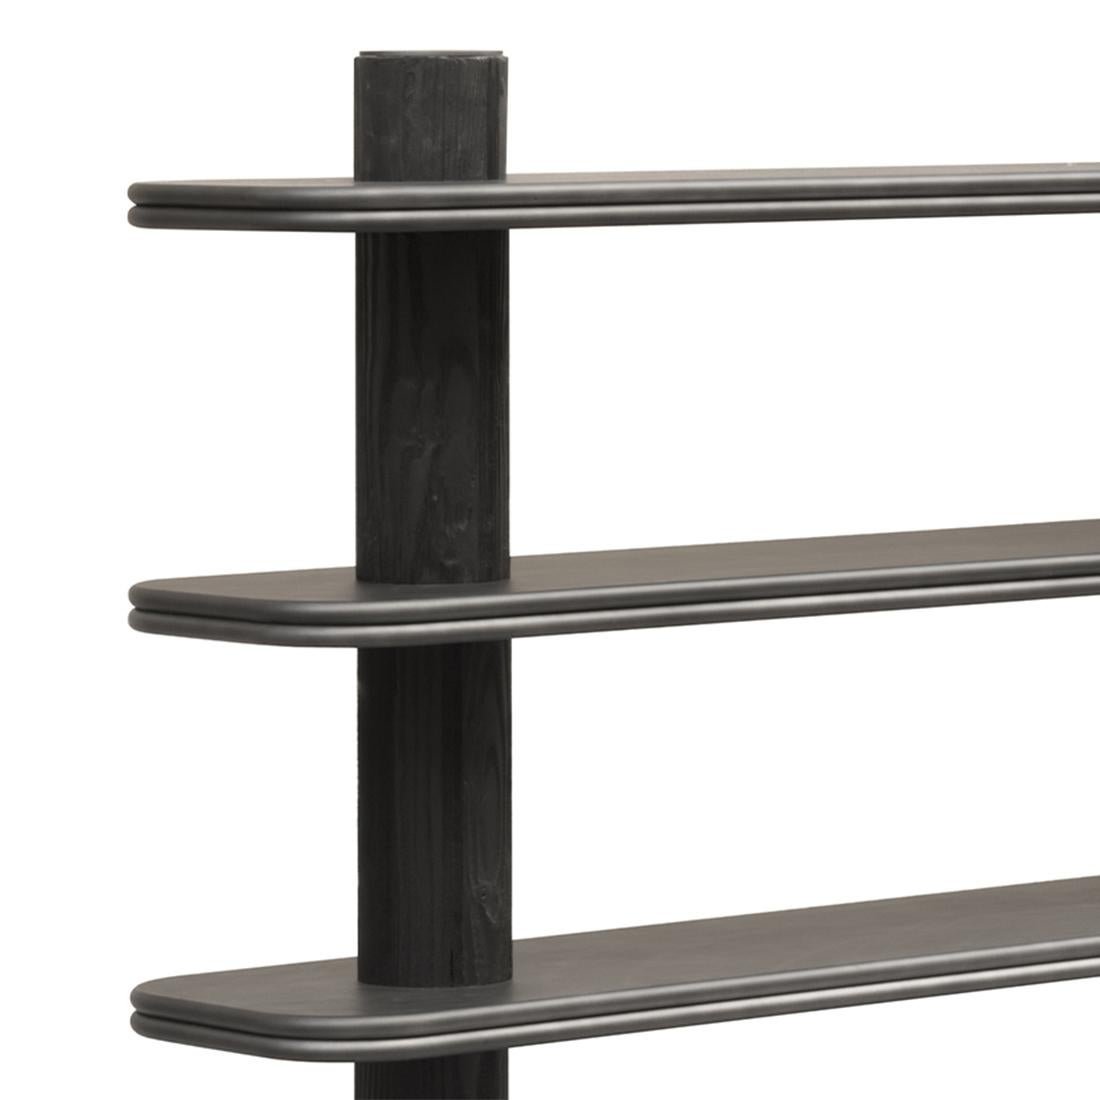 Bookcase Positano black with 2 poles structure 
in solid wood in dark lacquered finish and solid
wooden shelves and base covered with dark 
bronzed genuine leather.
Also available with other leather colors on request.